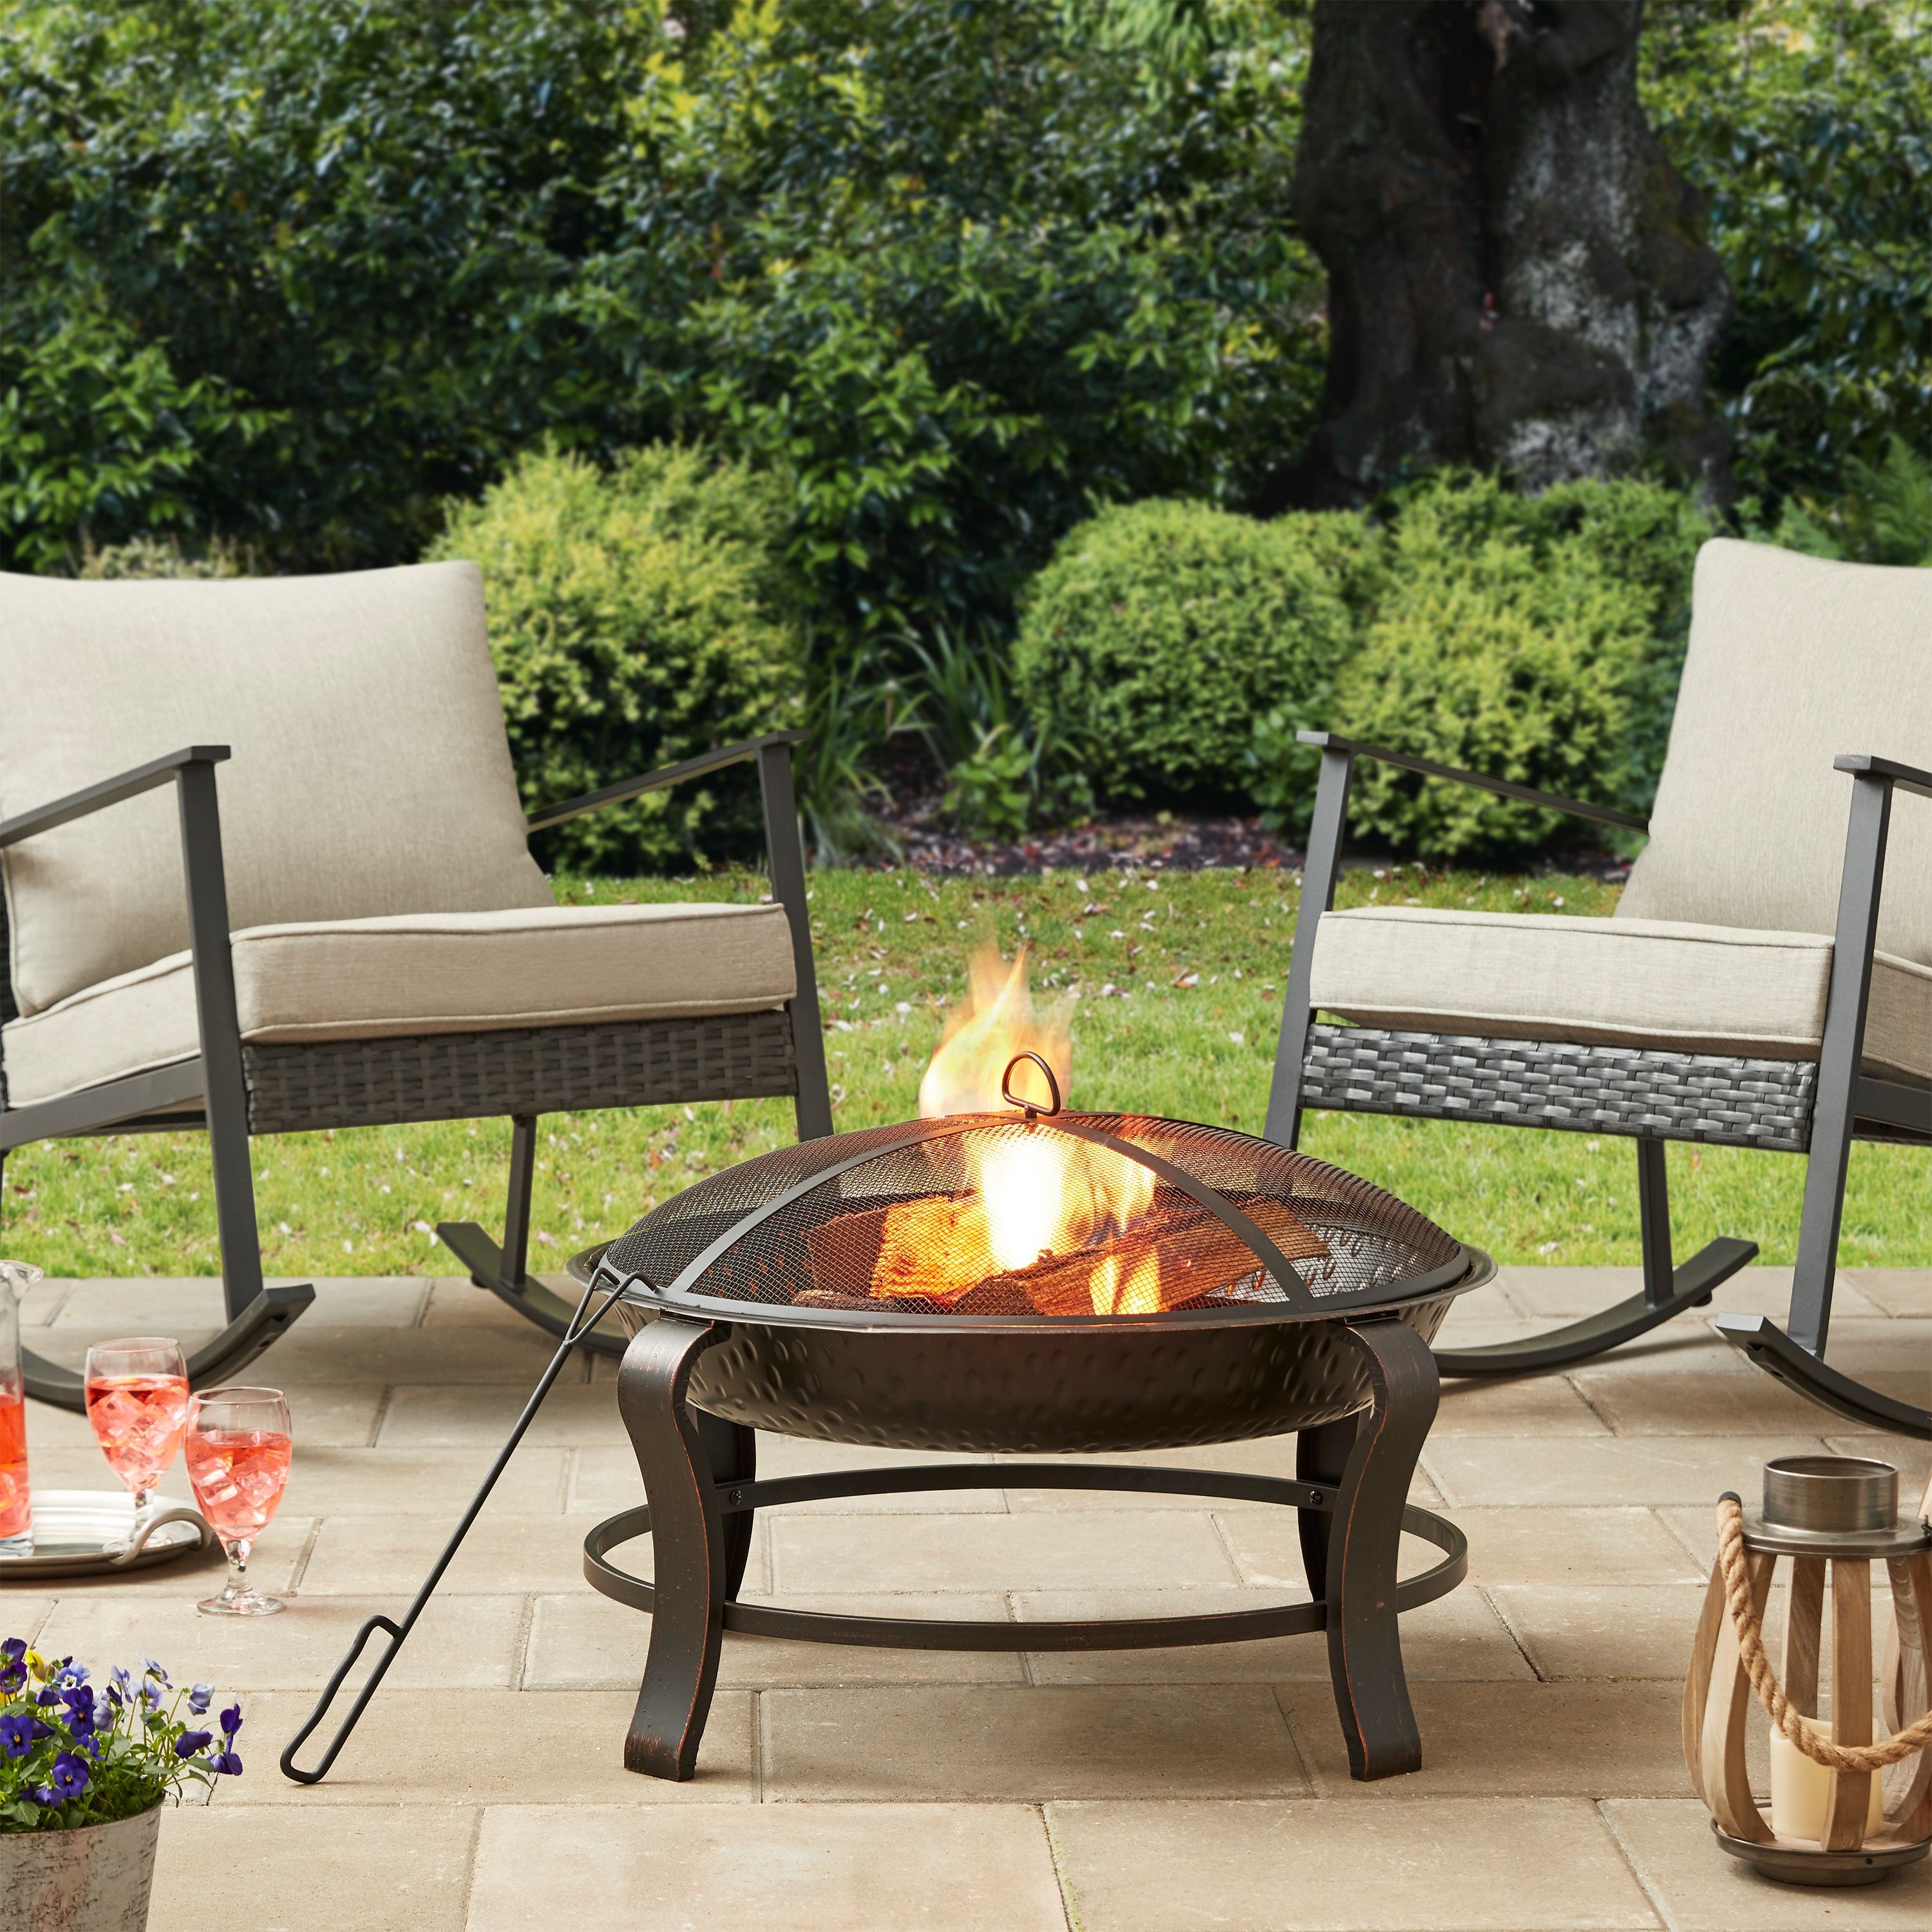 Best Wood Burning Fire Pits Where To, Patio Fire Pit Wood Burning